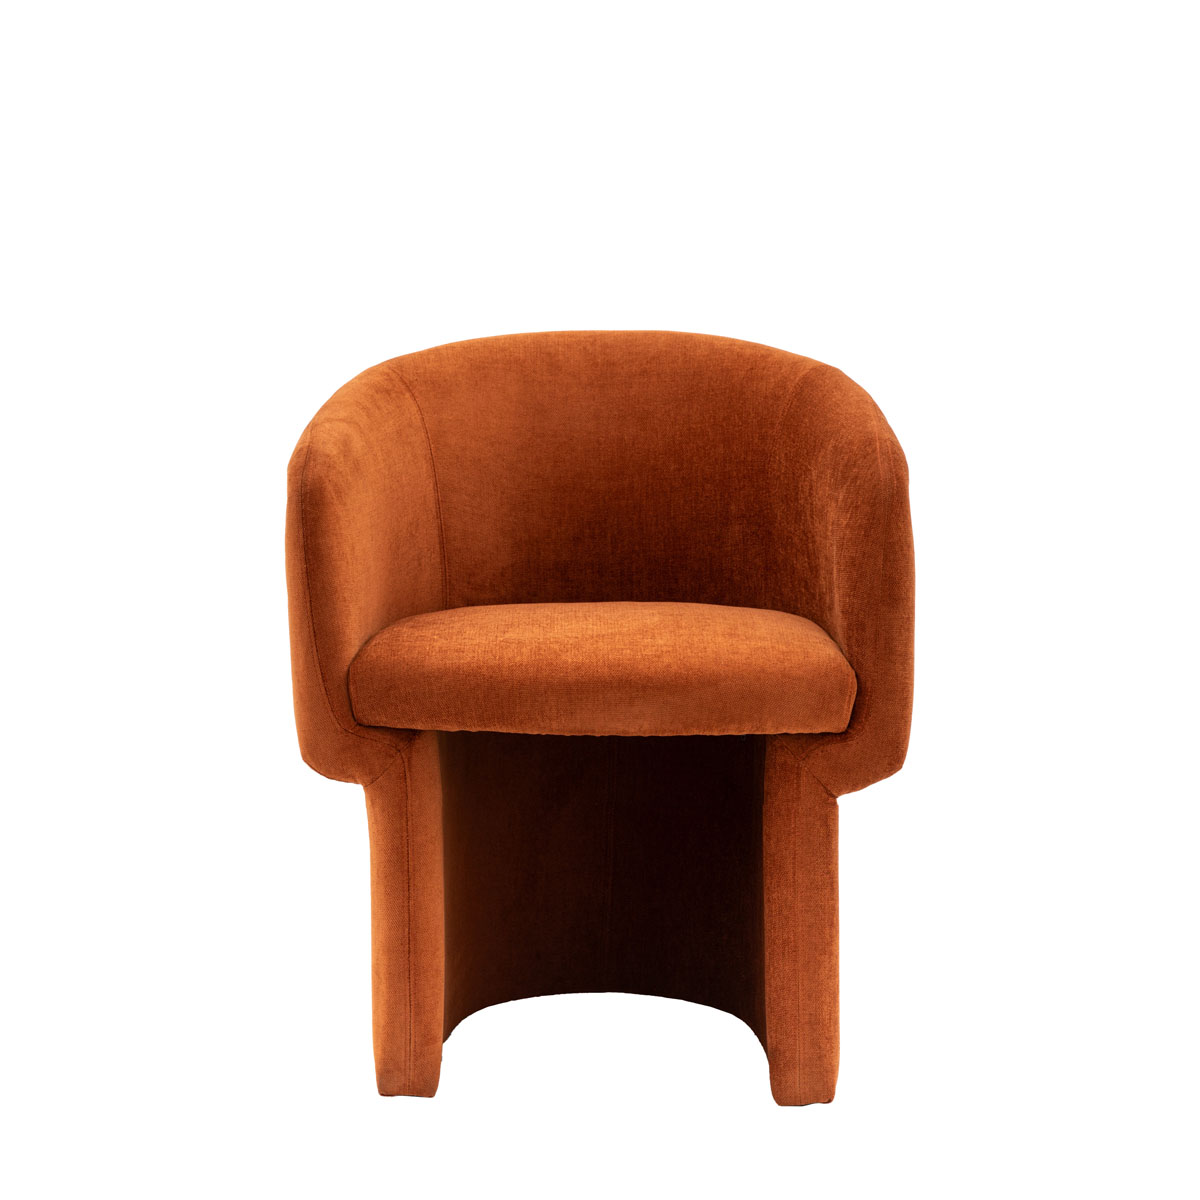 Holm Dining Chair Rust 640x630x750mm